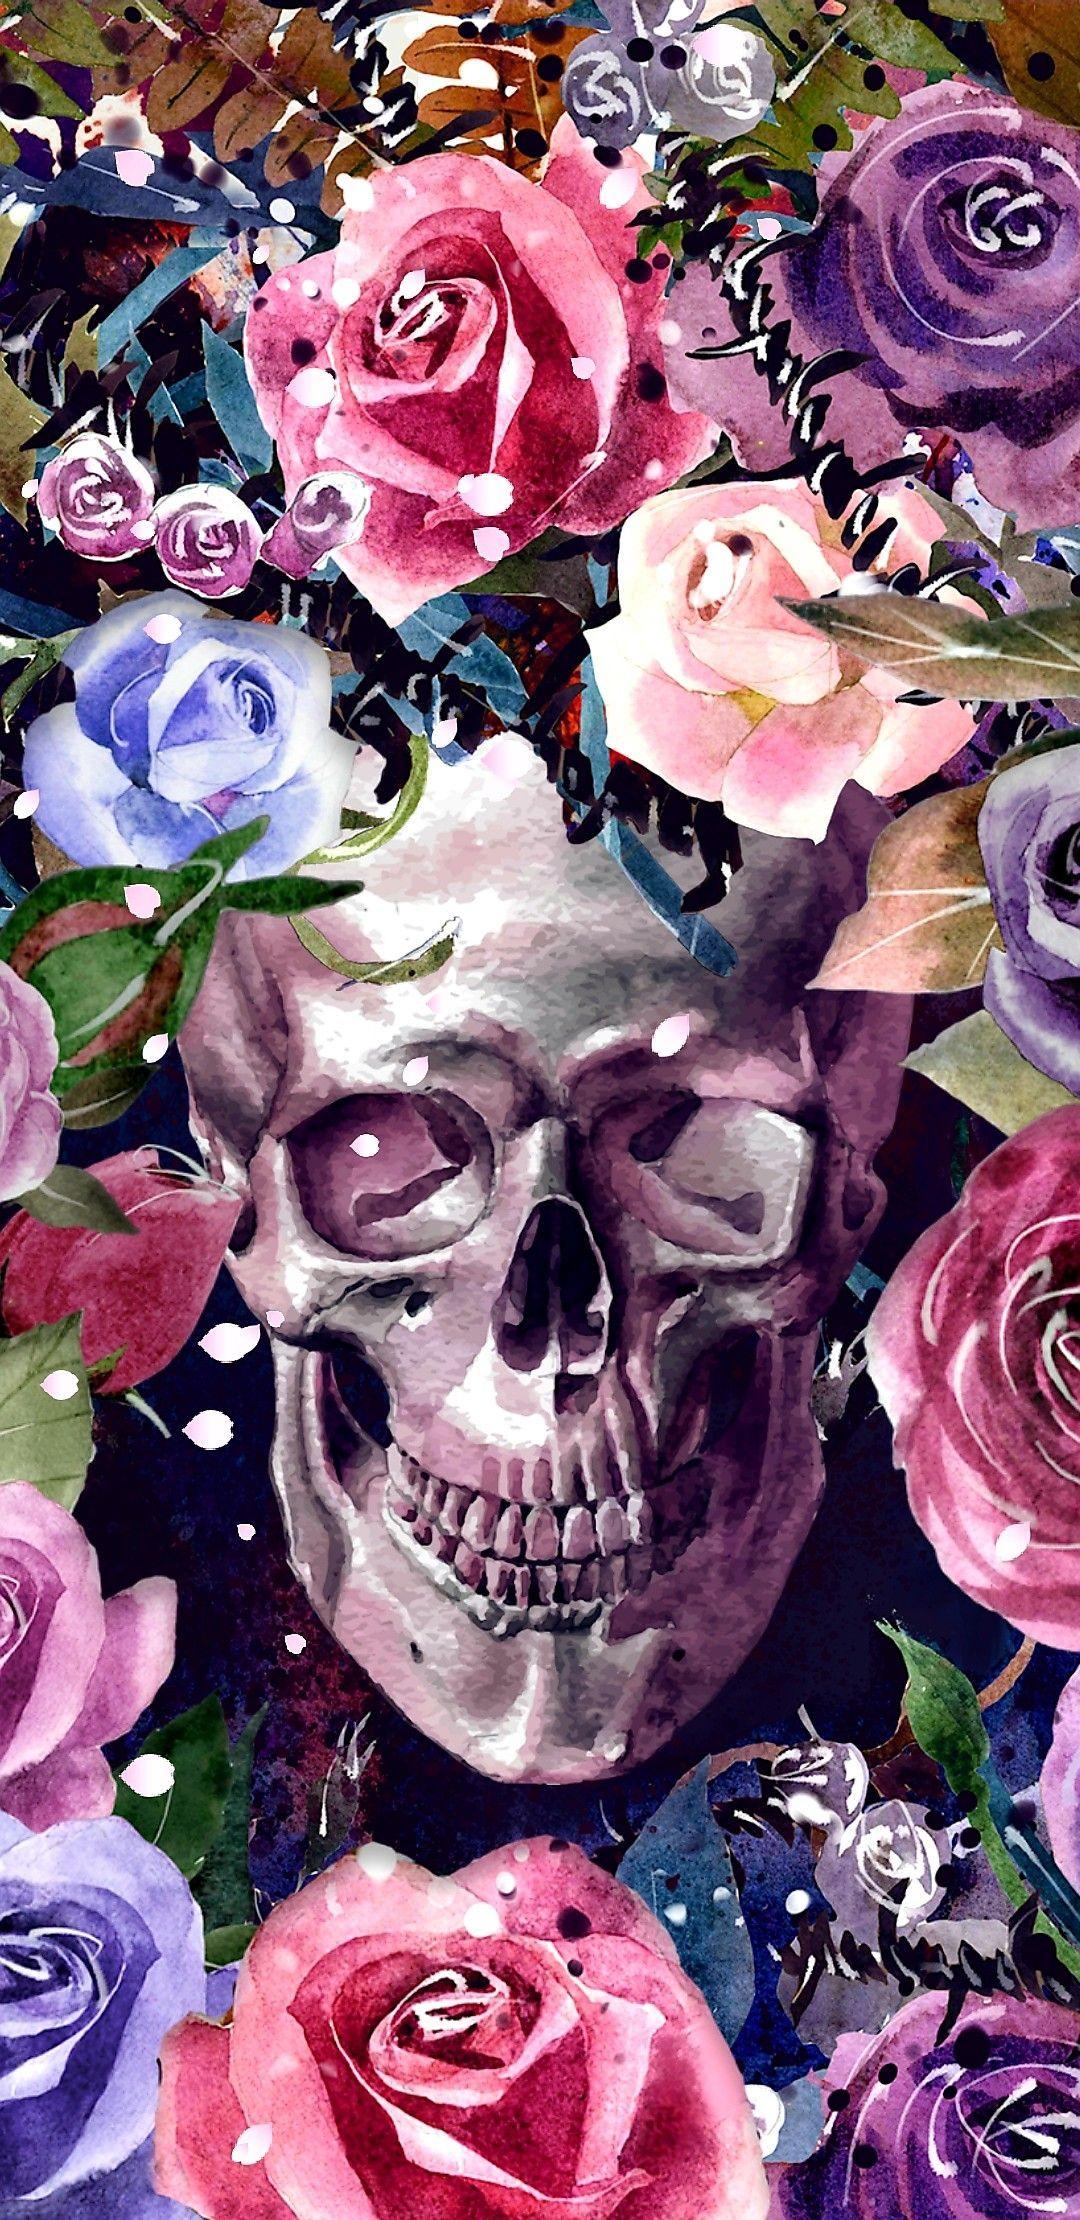 Download wallpaper 1125x2436 skull and roses artwork iphone x 1125x2436  hd background 24197